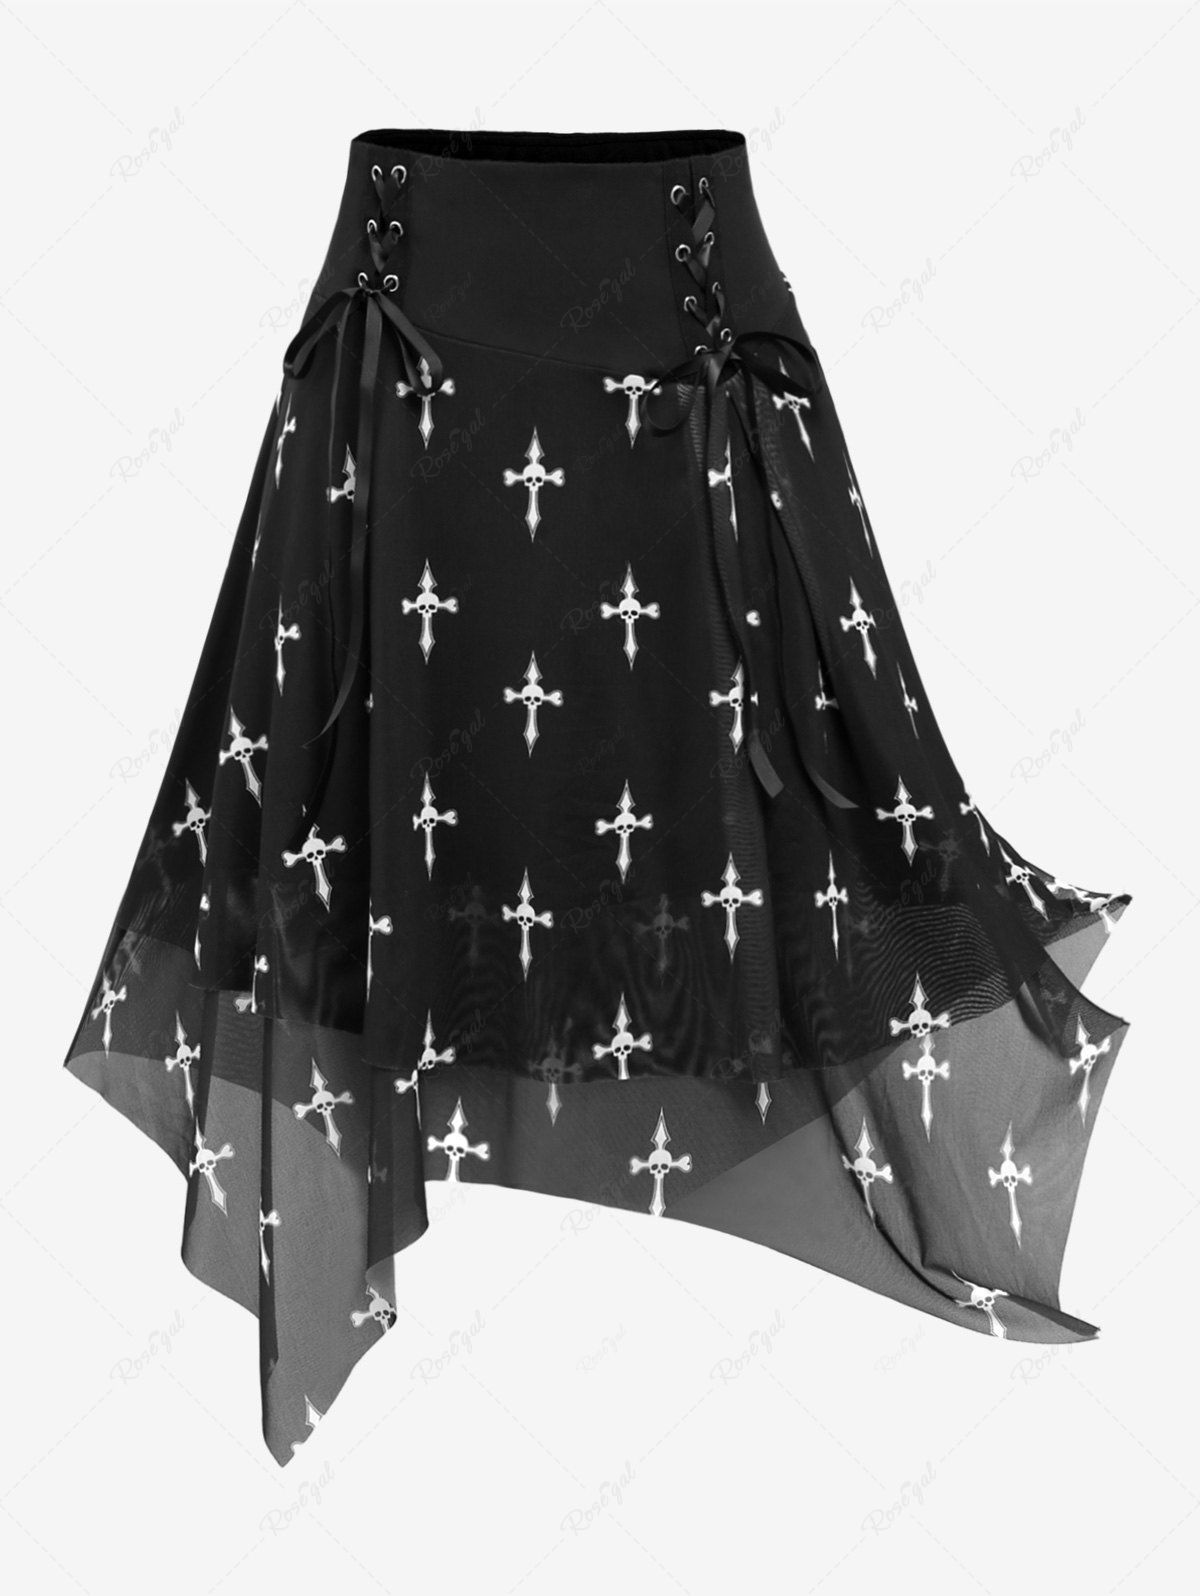 Chic Plus Size Halloween Skull Cross Printed Mesh Lace Up Layered Skirt  